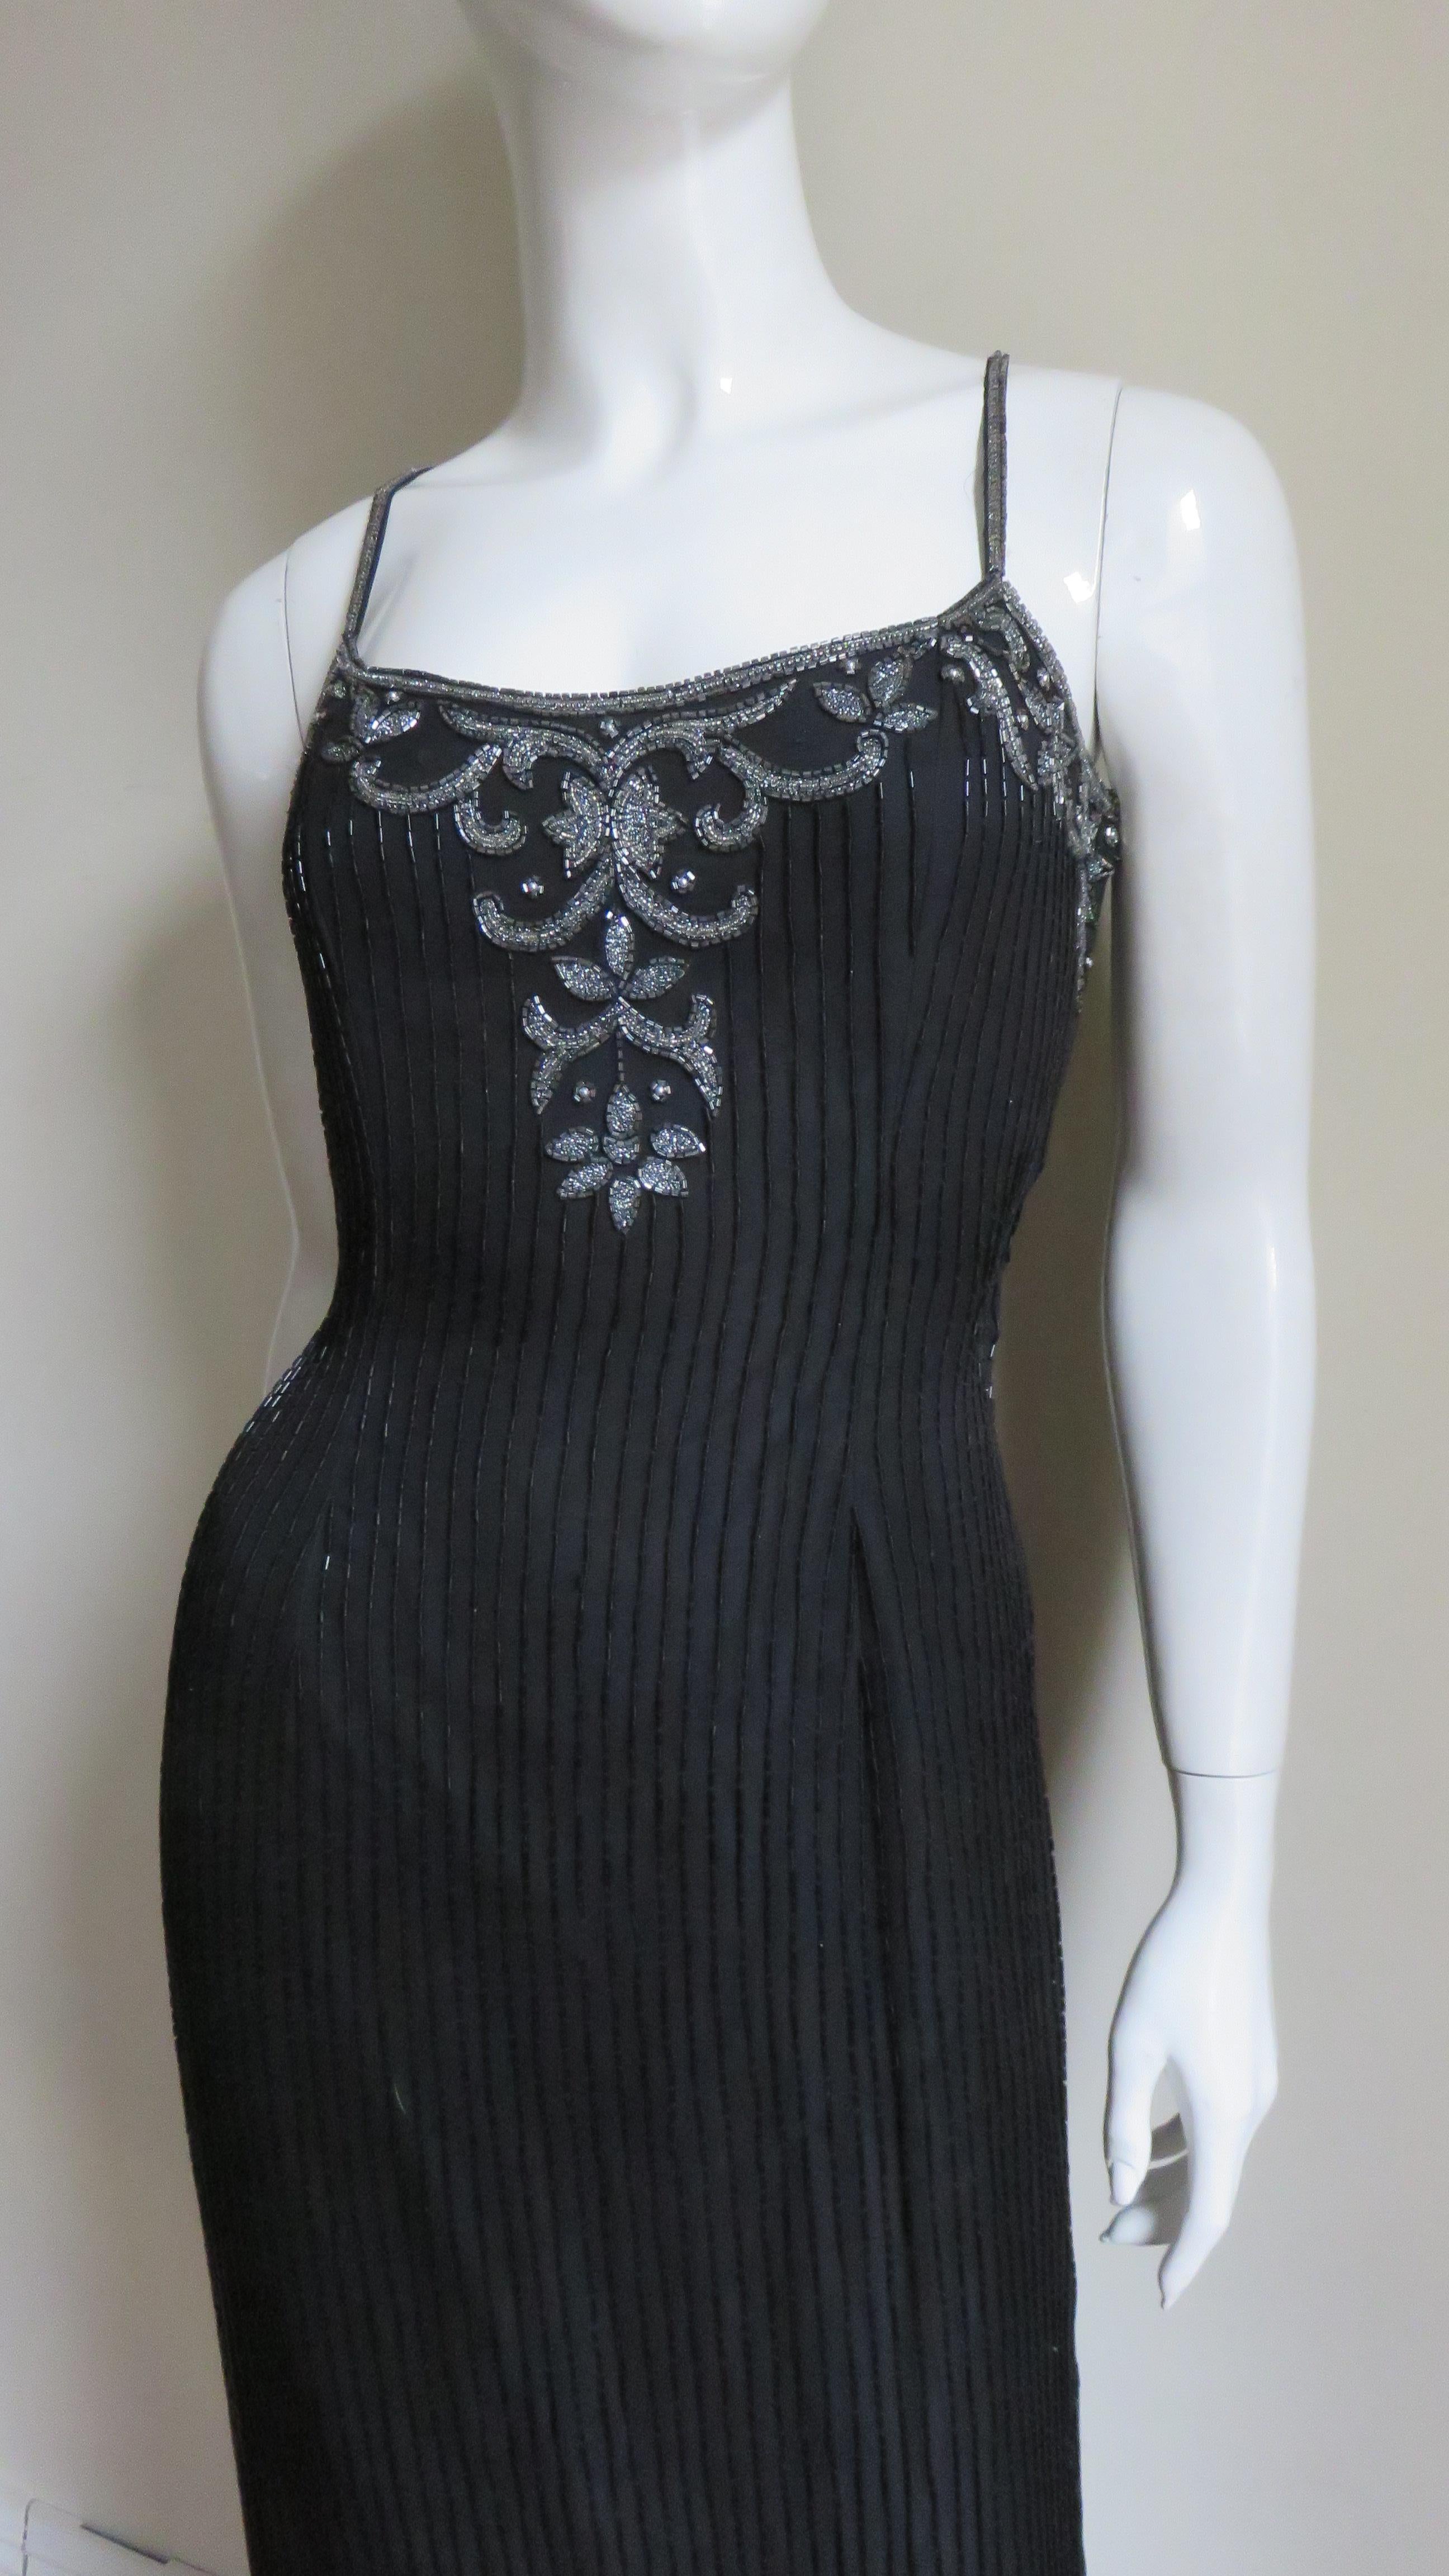 A beautiful full length beaded black silk gown from Sonia Rykiel. There are lines of tubular black glass beads the full length of the dress and the front bodice is accented with a silver beaded design which is also on the entire sheer to the waist